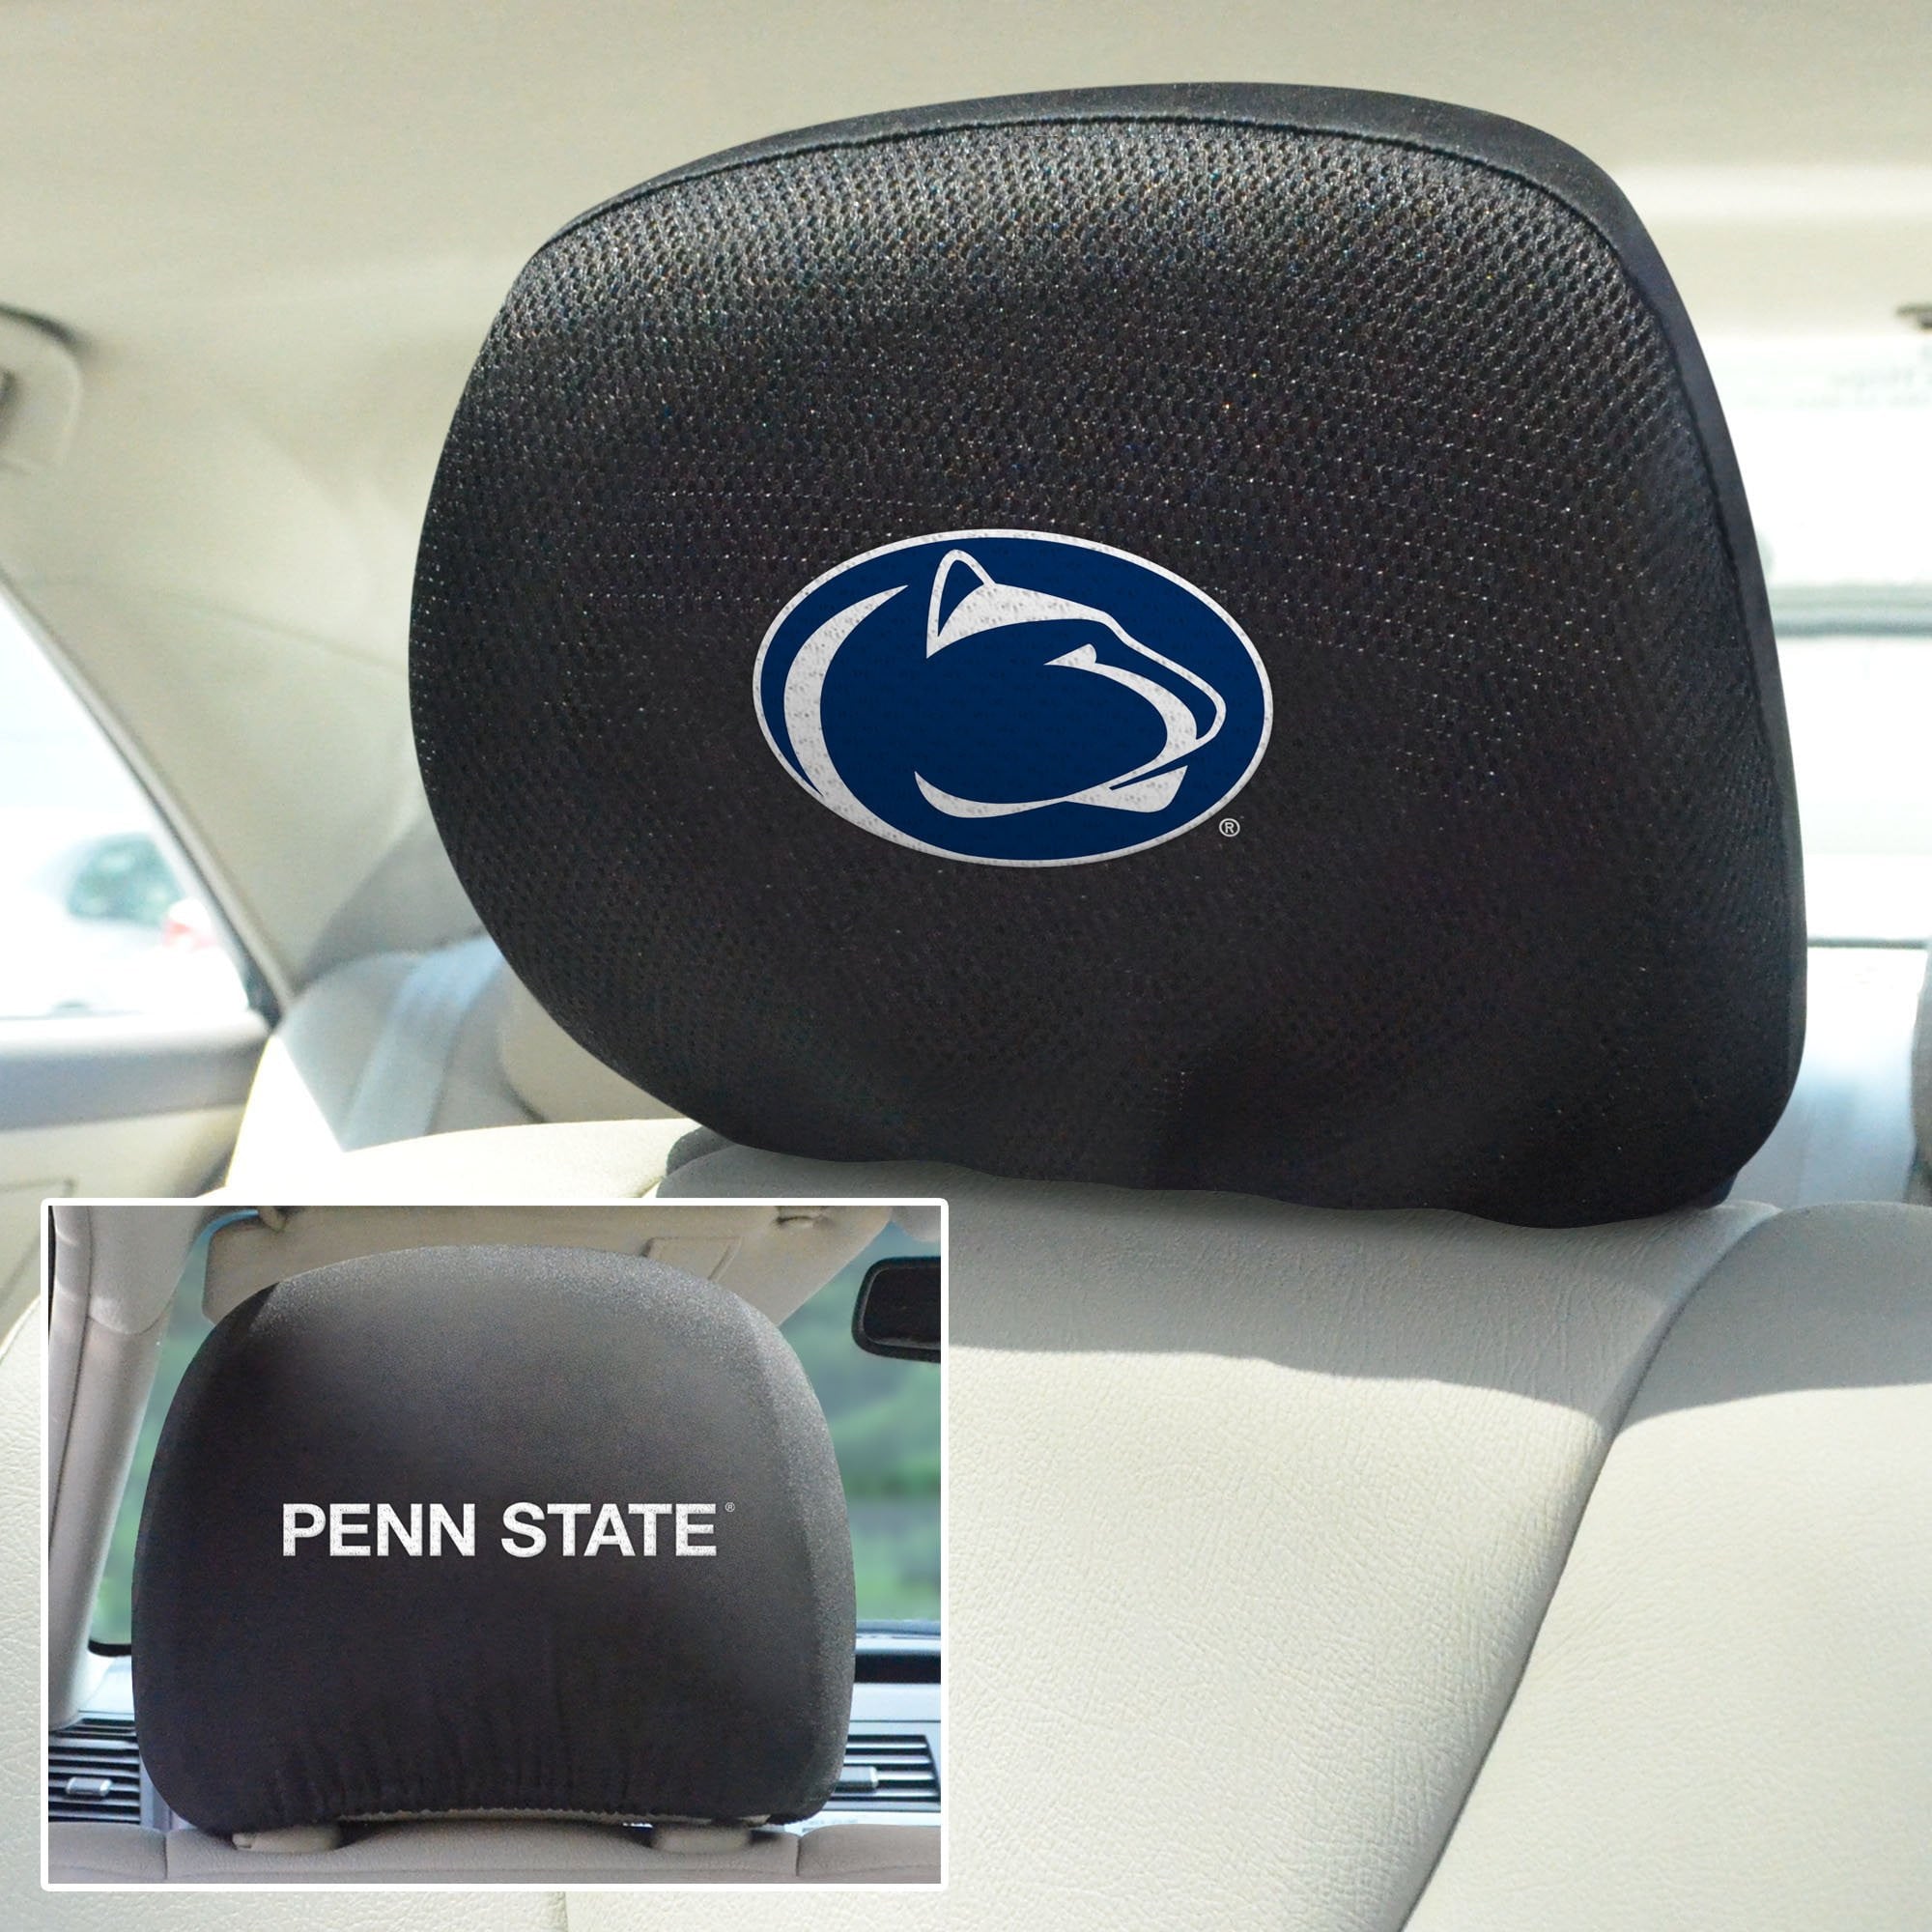 Penn State Nittany Lions Set of 2 Headrest Covers